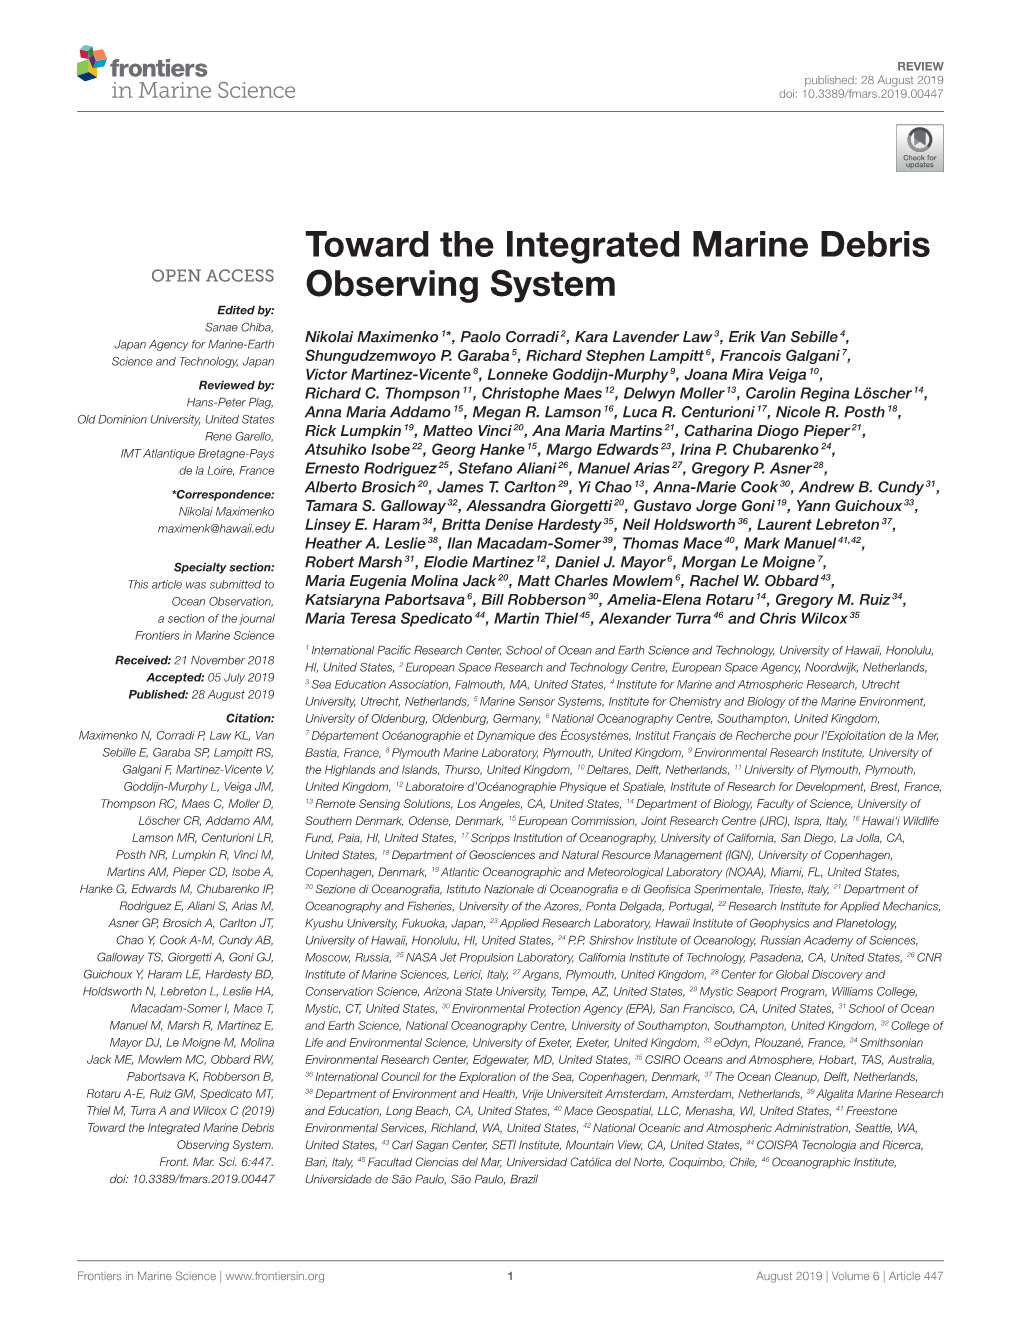 Toward the Integrated Marine Debris Observing System